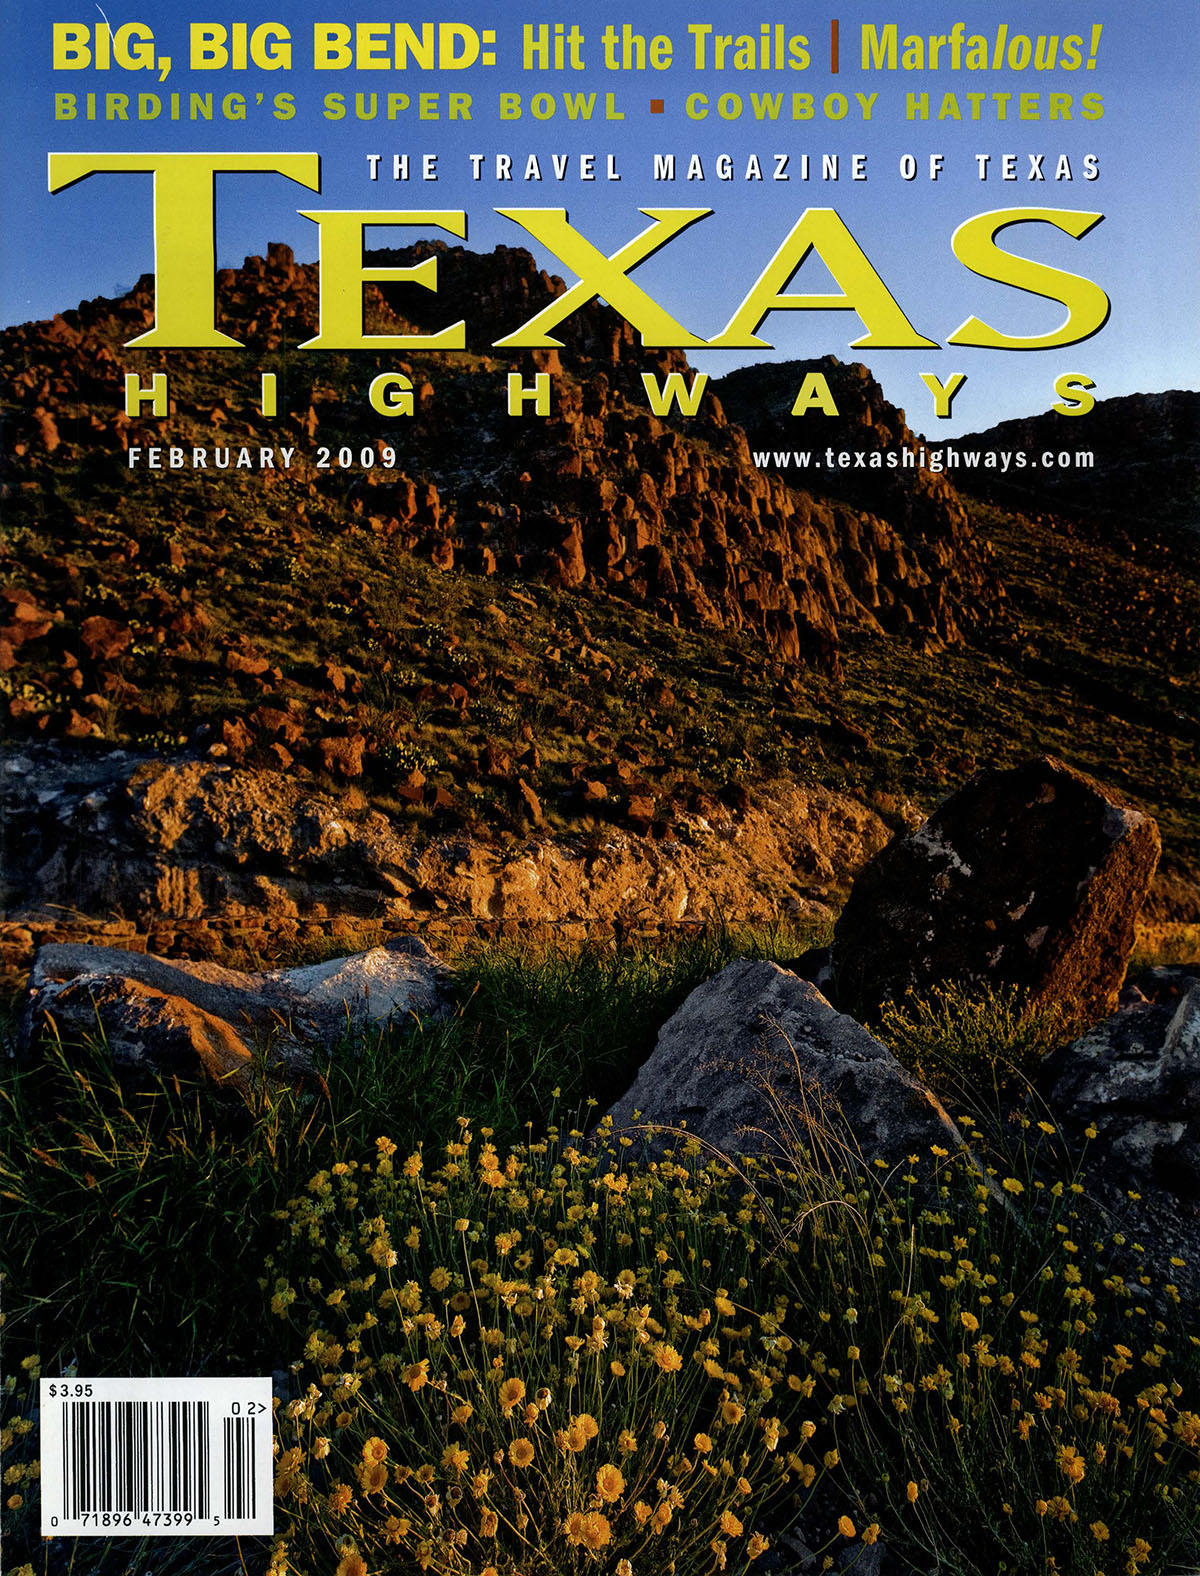 The February 2009 Cover of Texas Highways Magazine